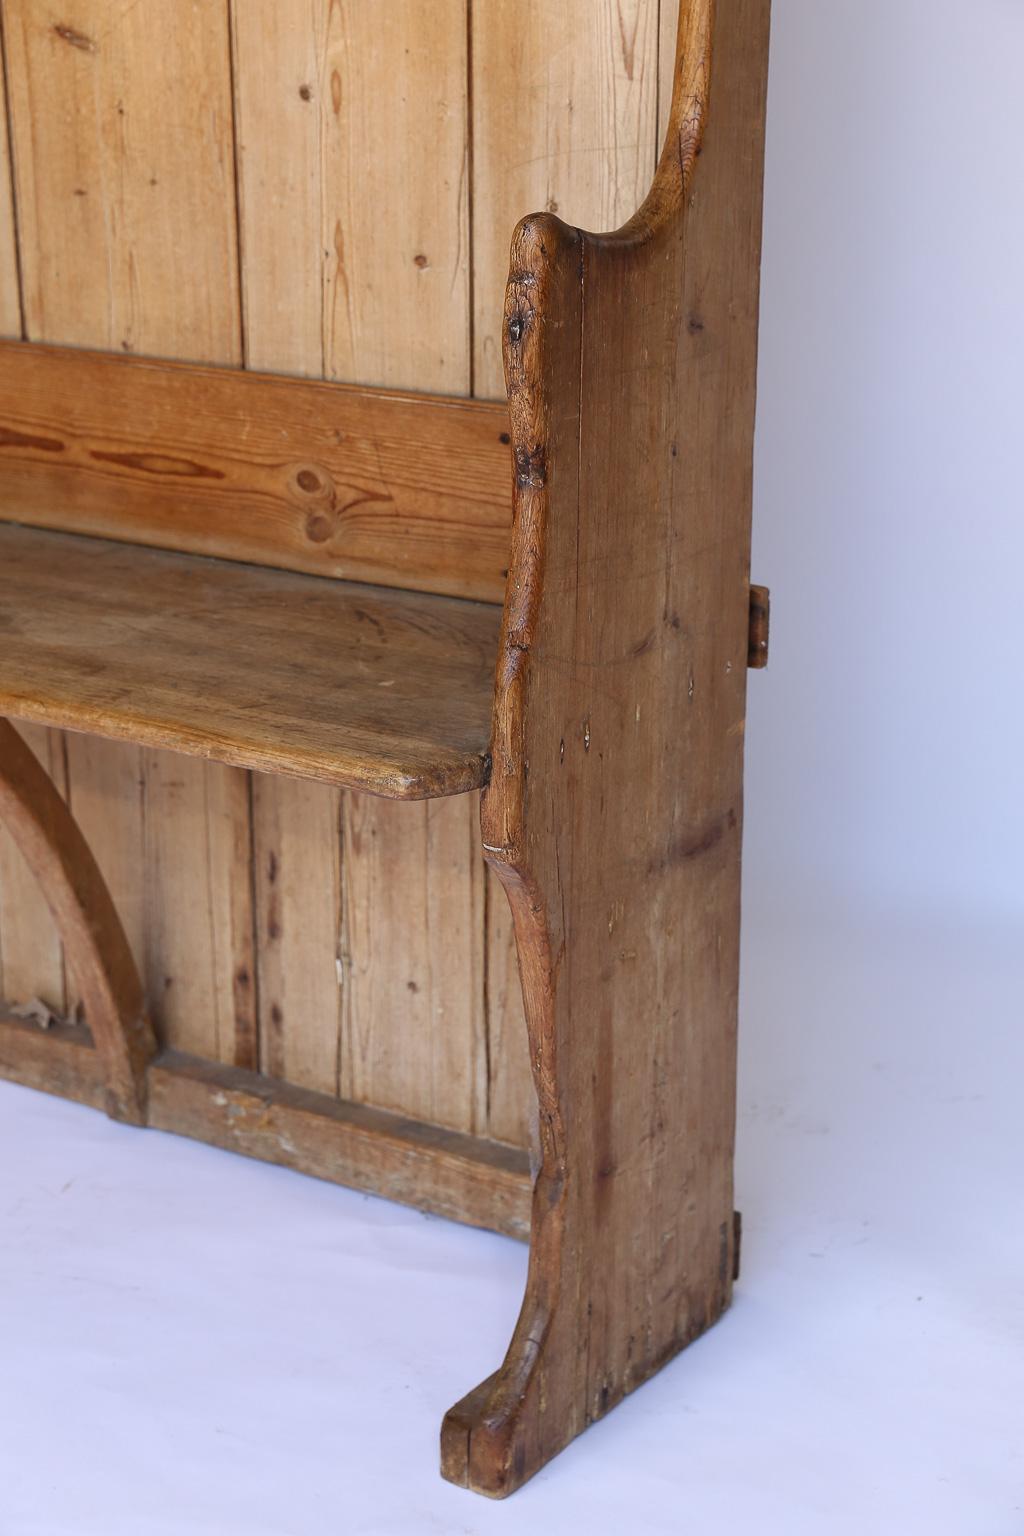 This antique pine settle has the perfect dimensions for a hallway. Found in England and made of pine, the piece is freestanding and sturdy. The settle has a beautiful waxed patina.